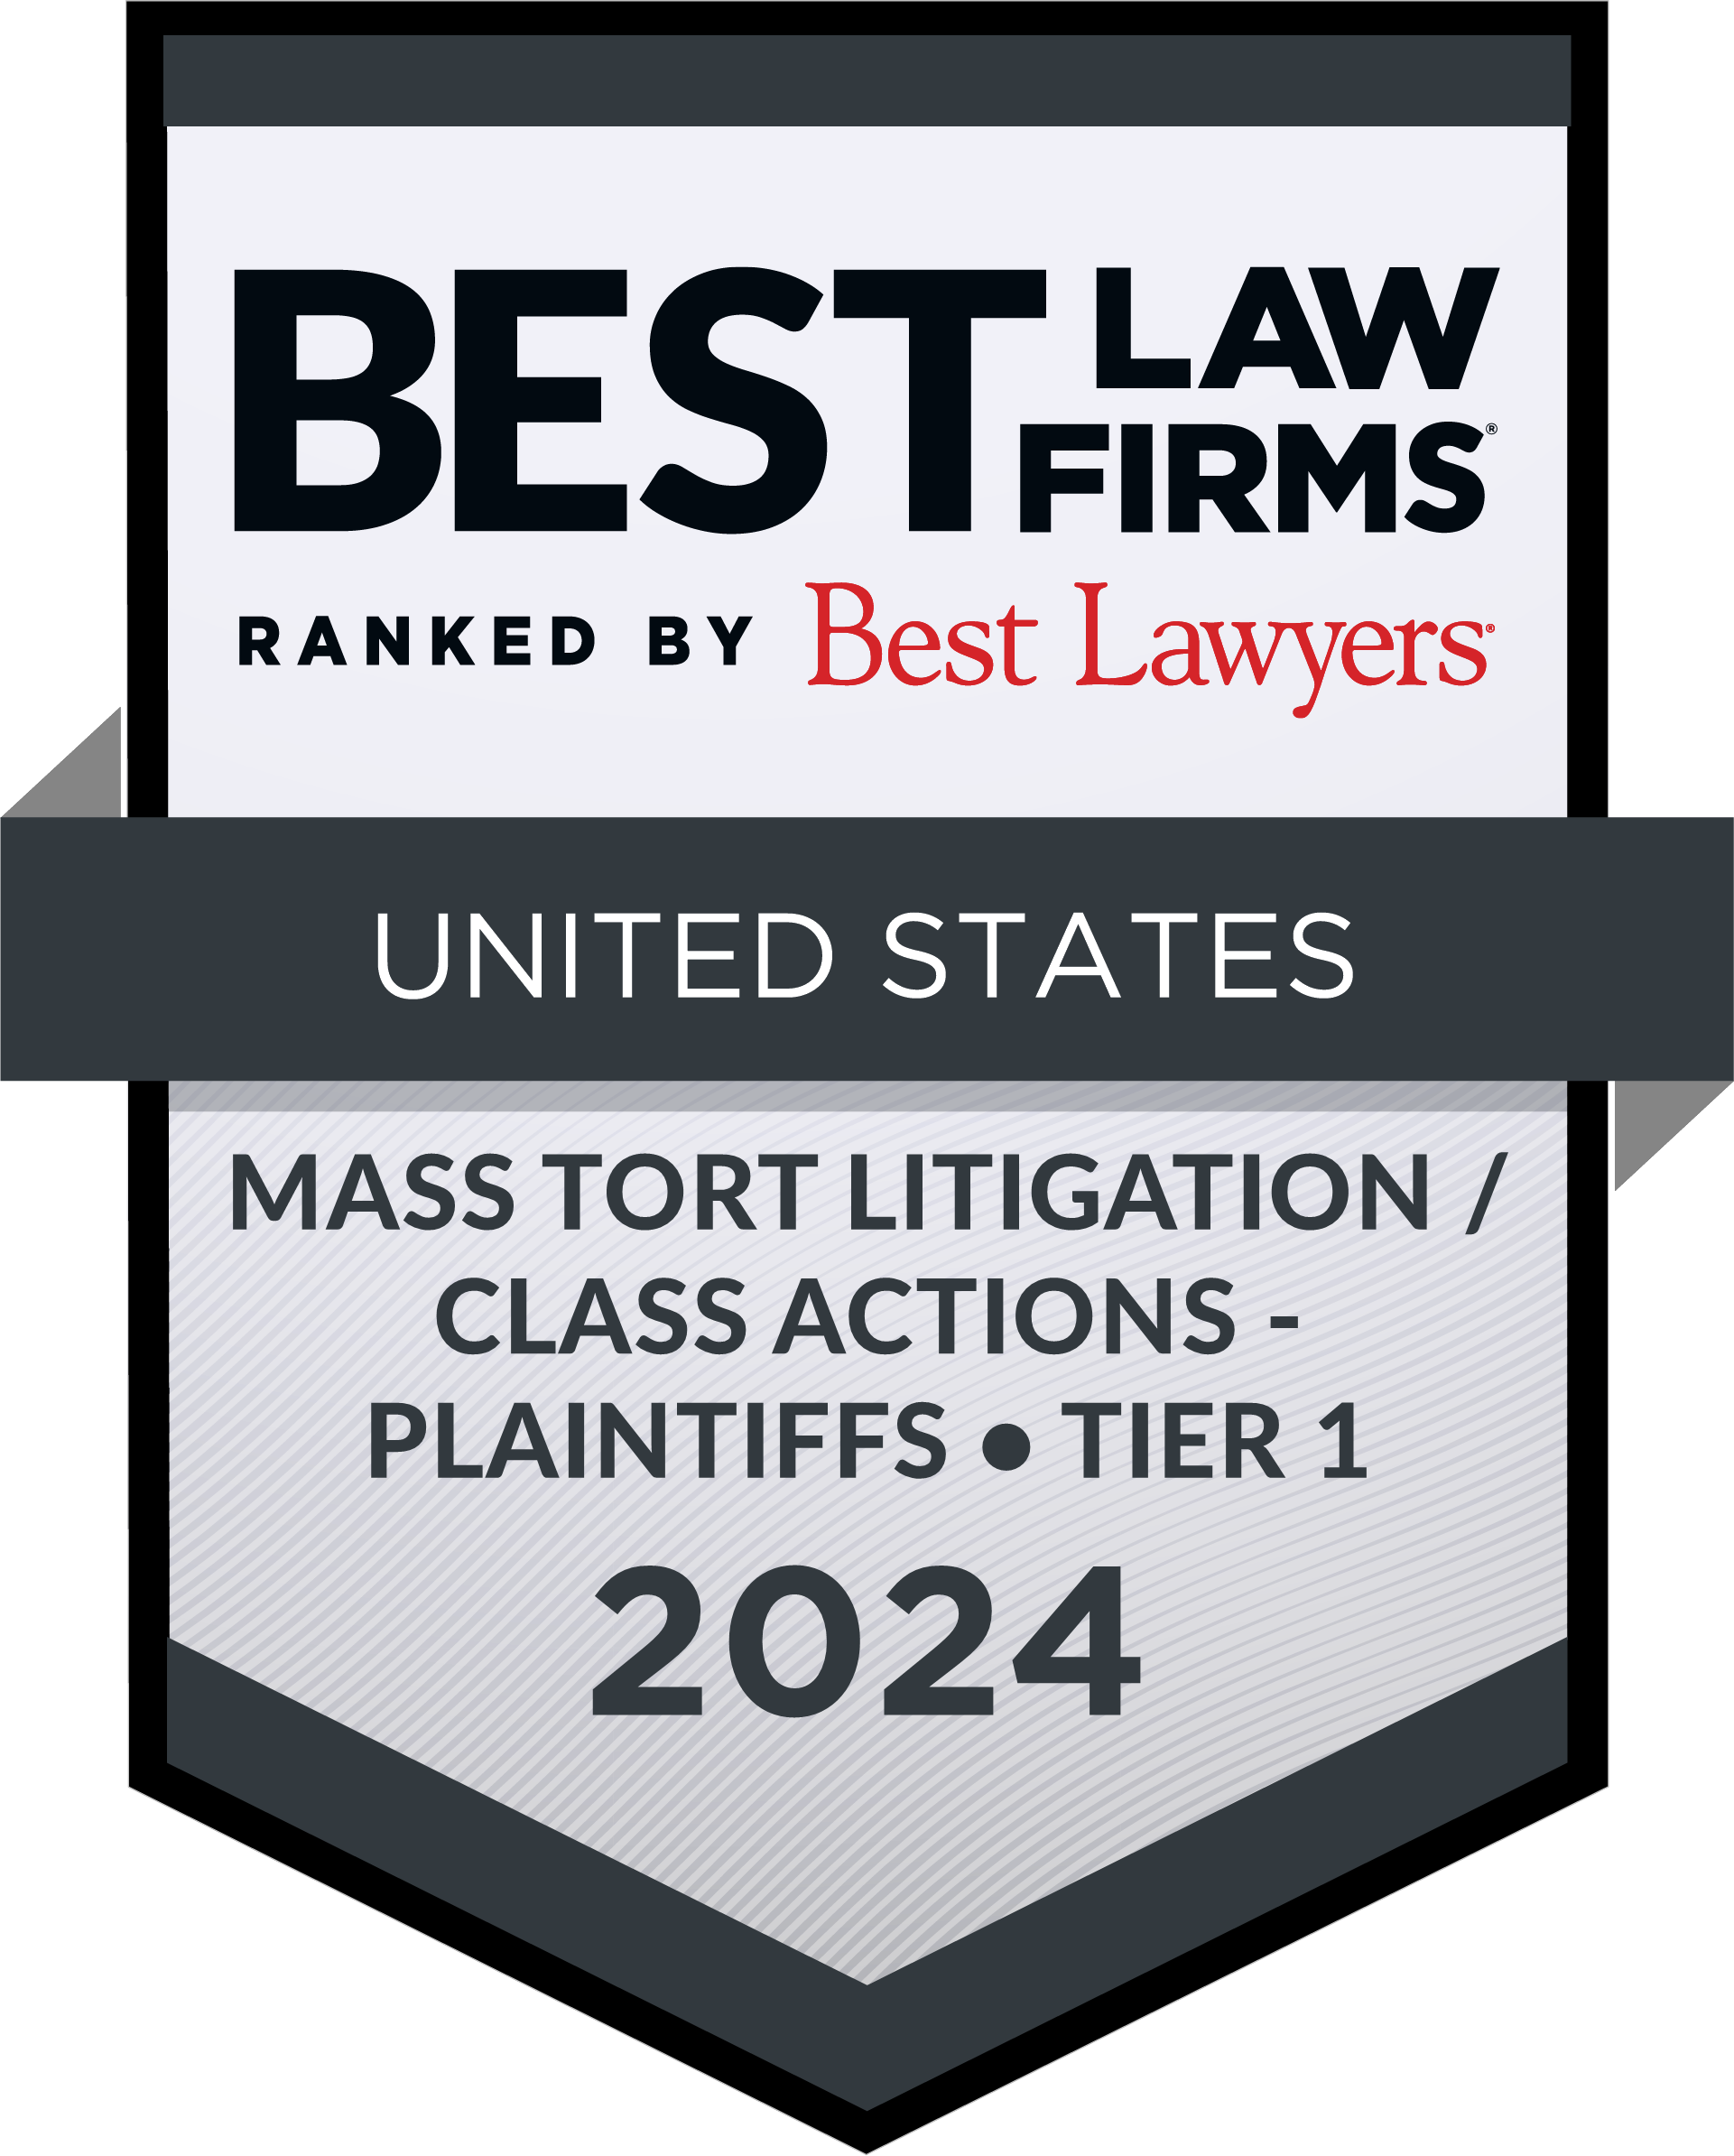 Best Law Firms - National Tier 1 Badge